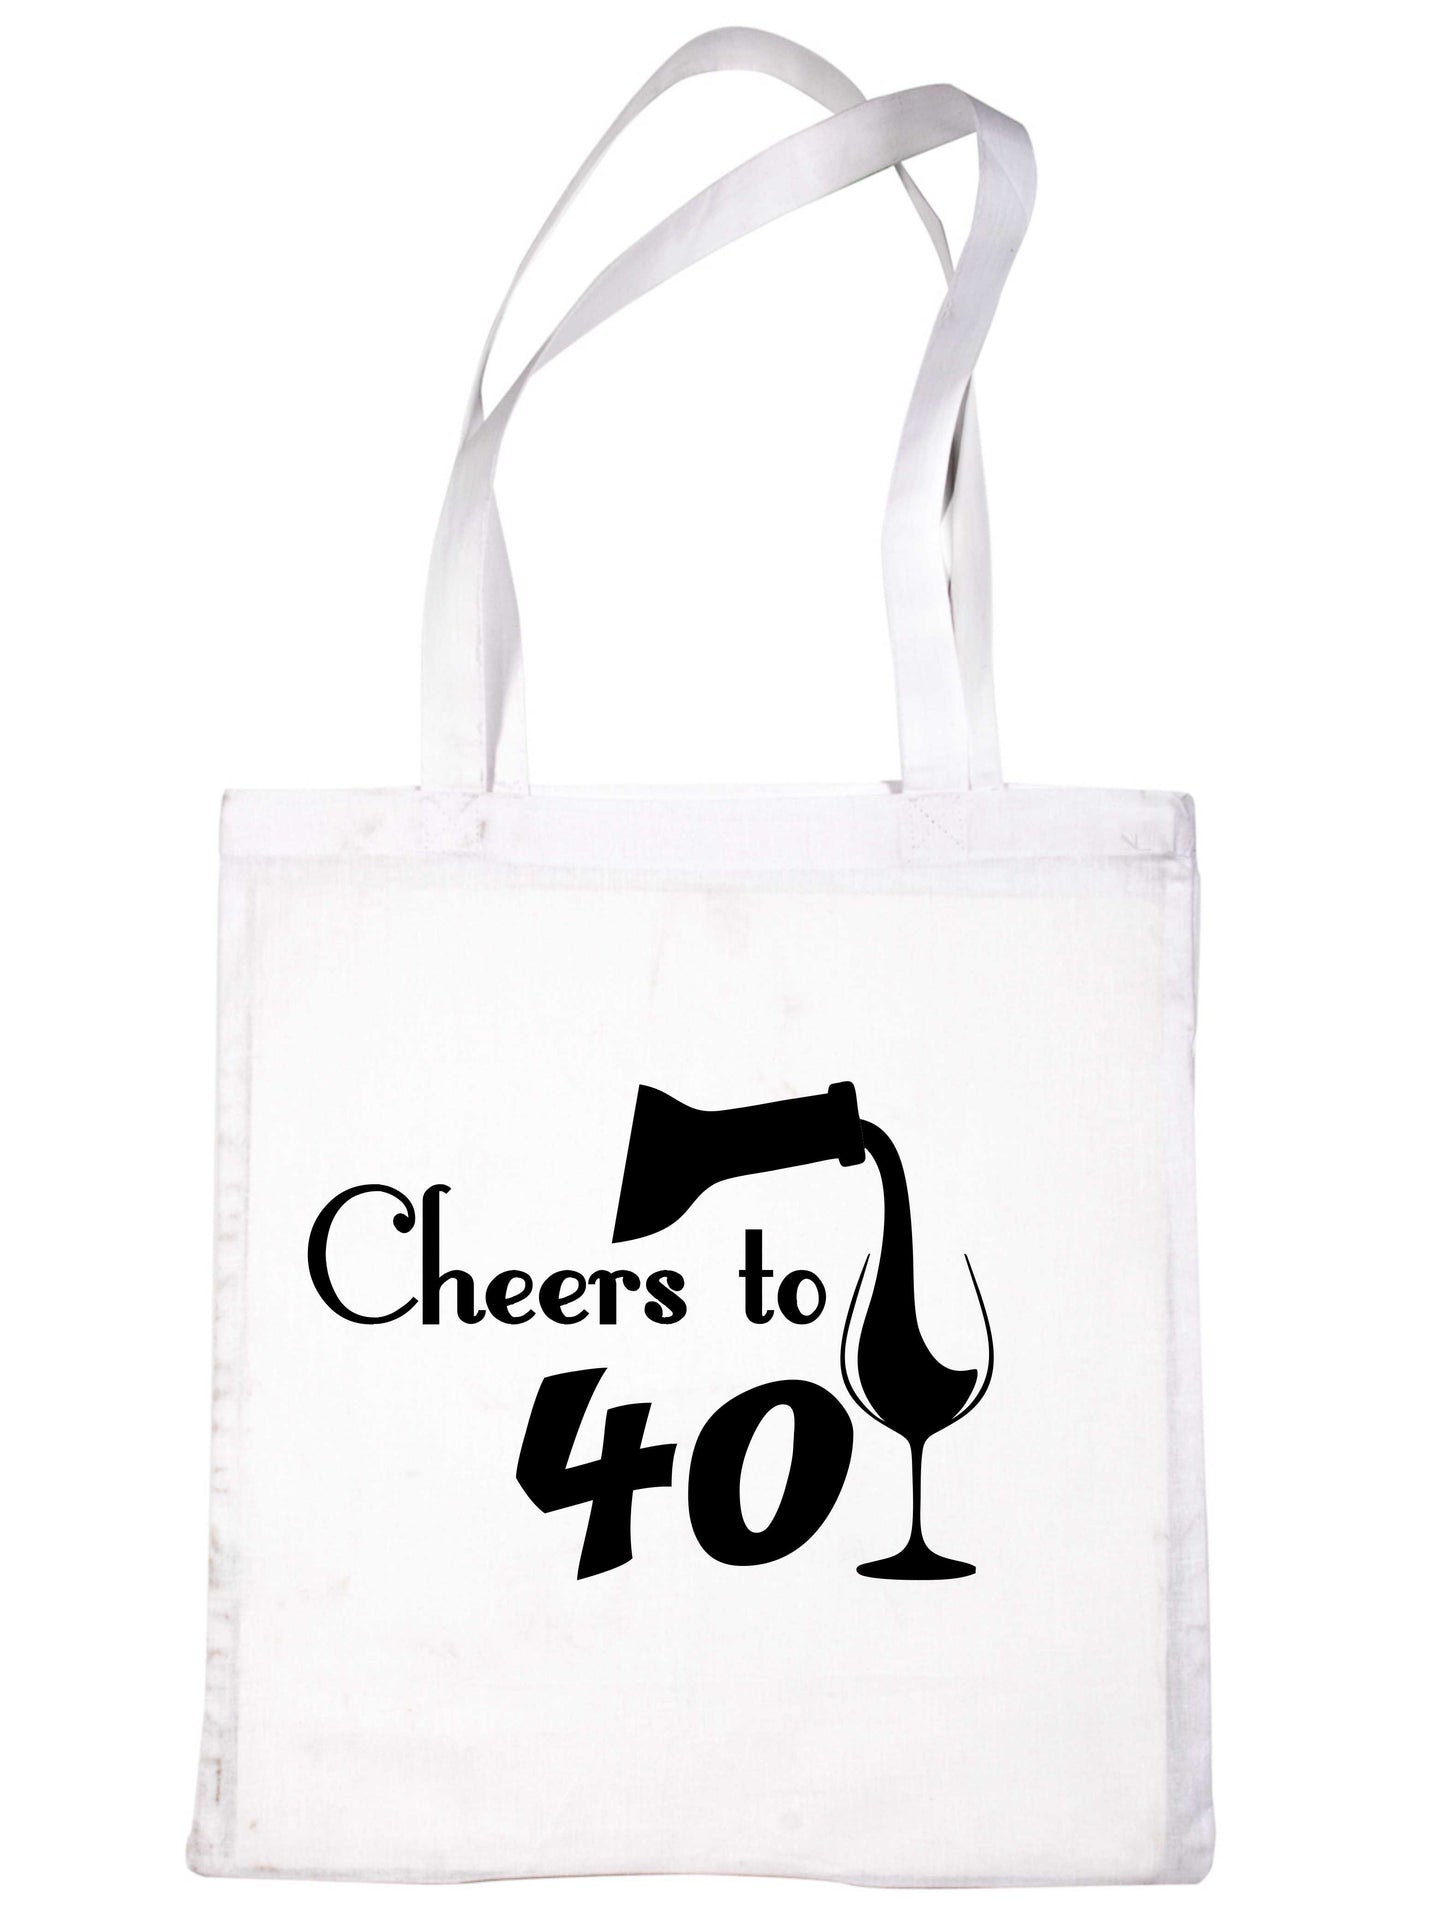 Cheers to Being 40 Birthday Gift For 40 Year Old Reusable Shopping Tote Bag